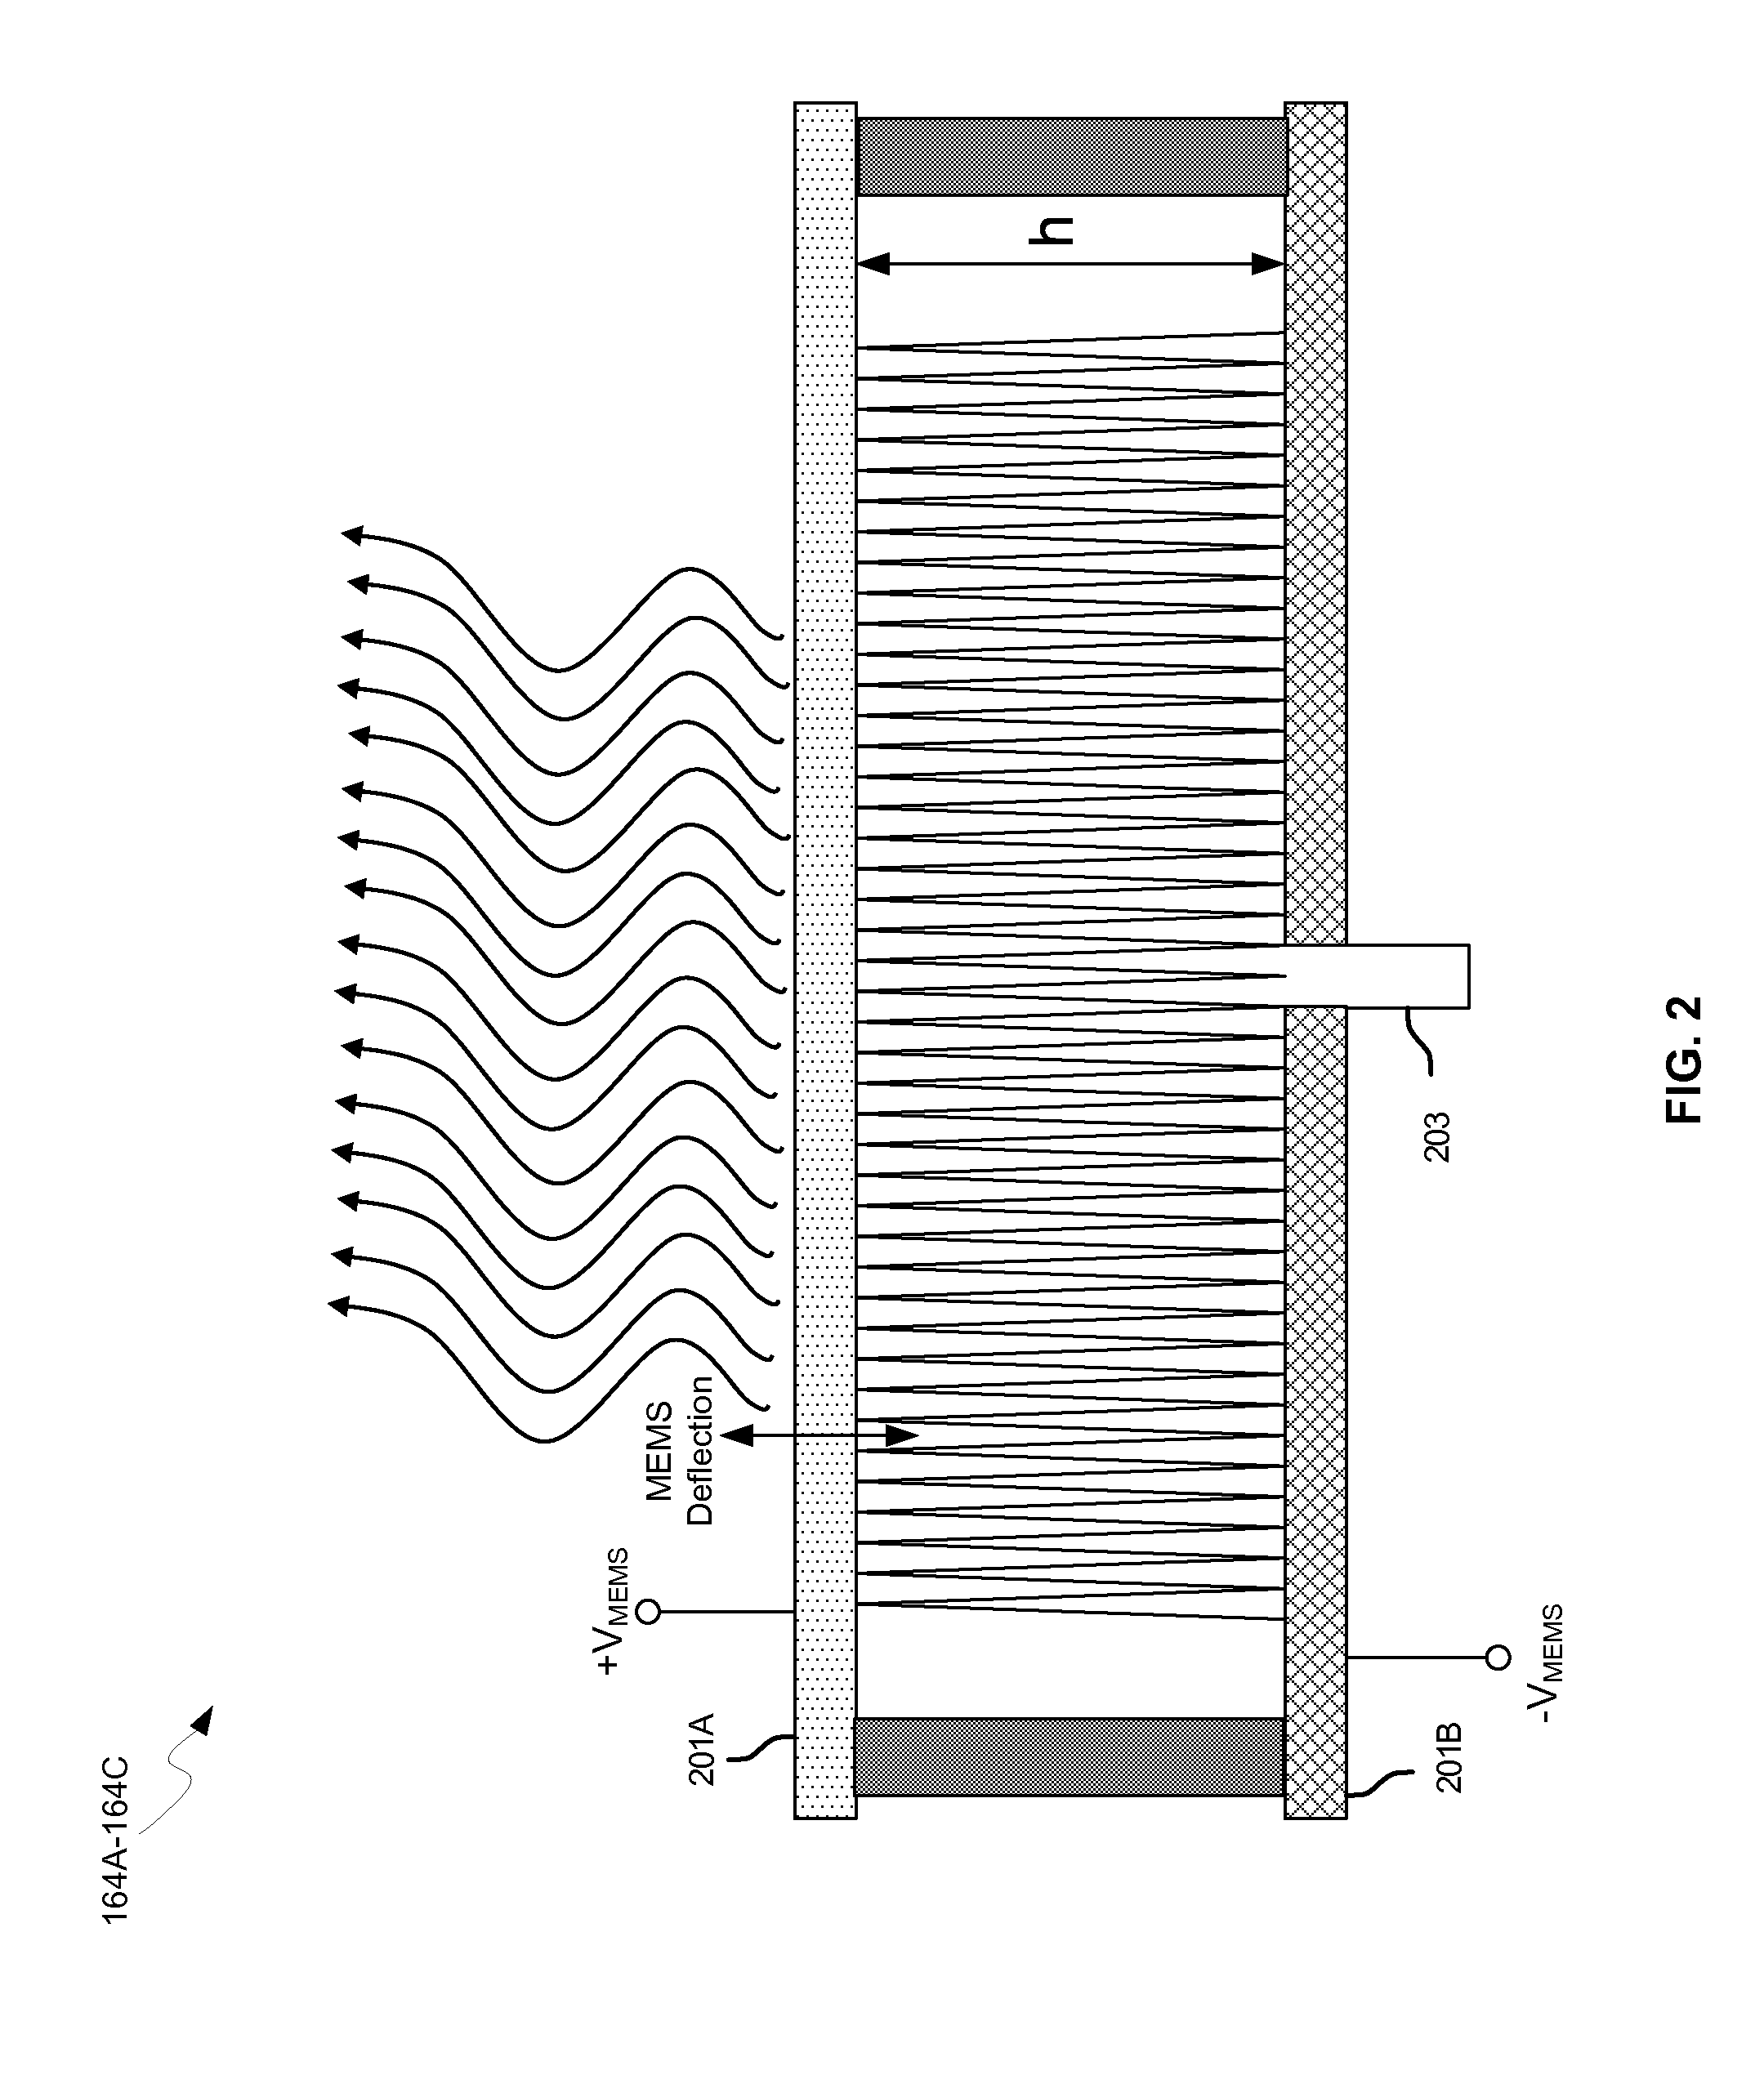 Method and system for clock distribution utilizing leaky wave antennas